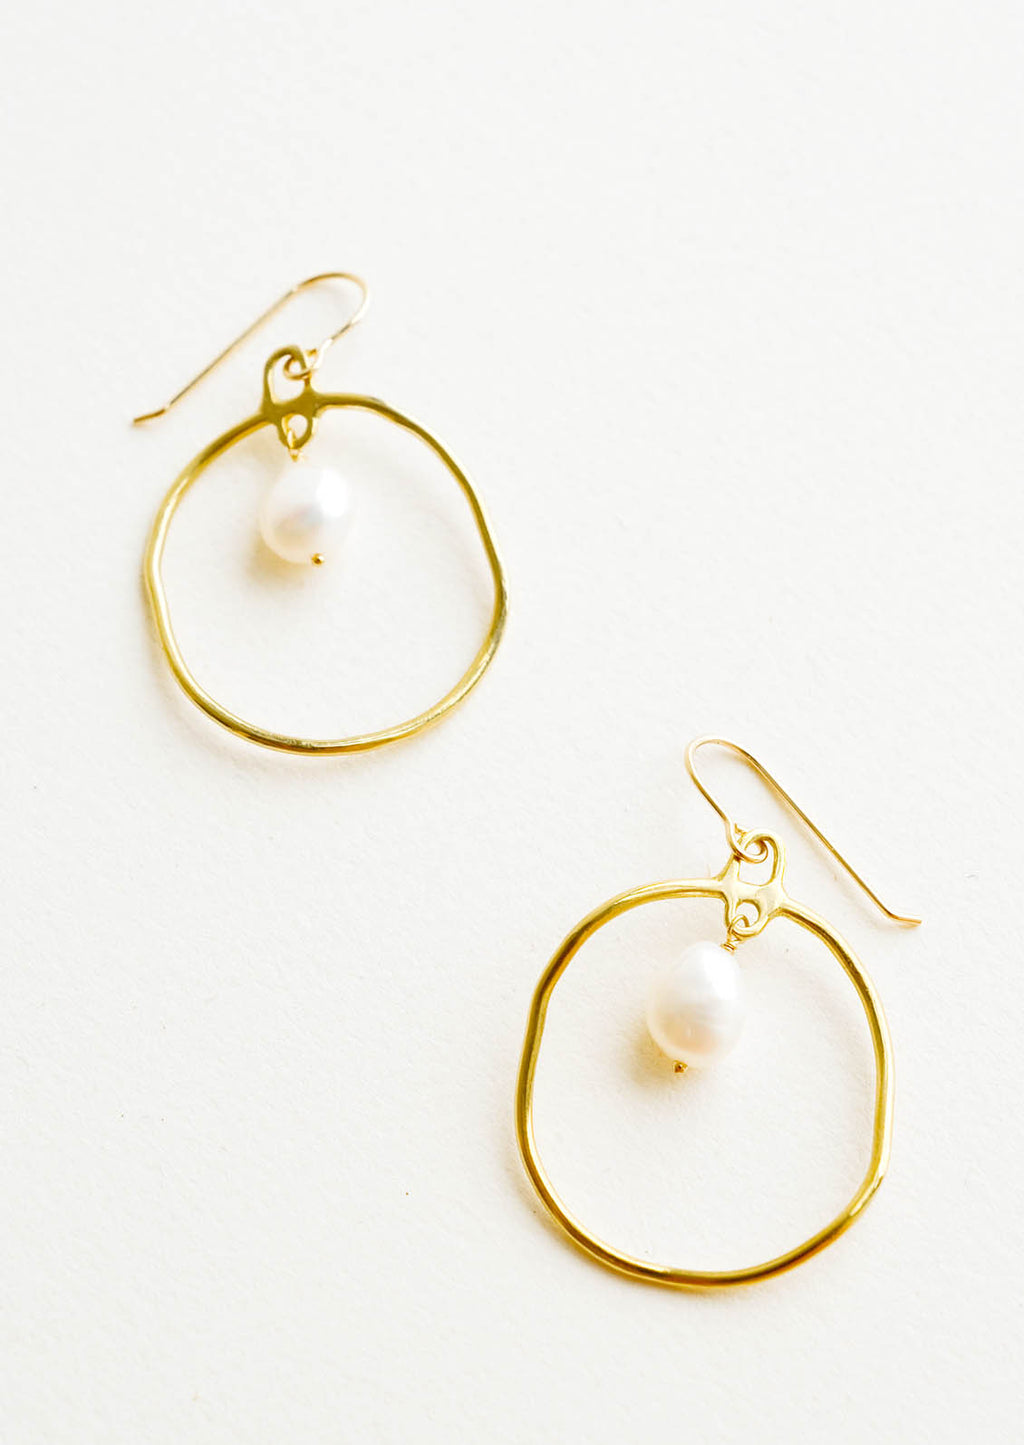 Brass: Circular drop earrings in gold with a small pearl dangling within.